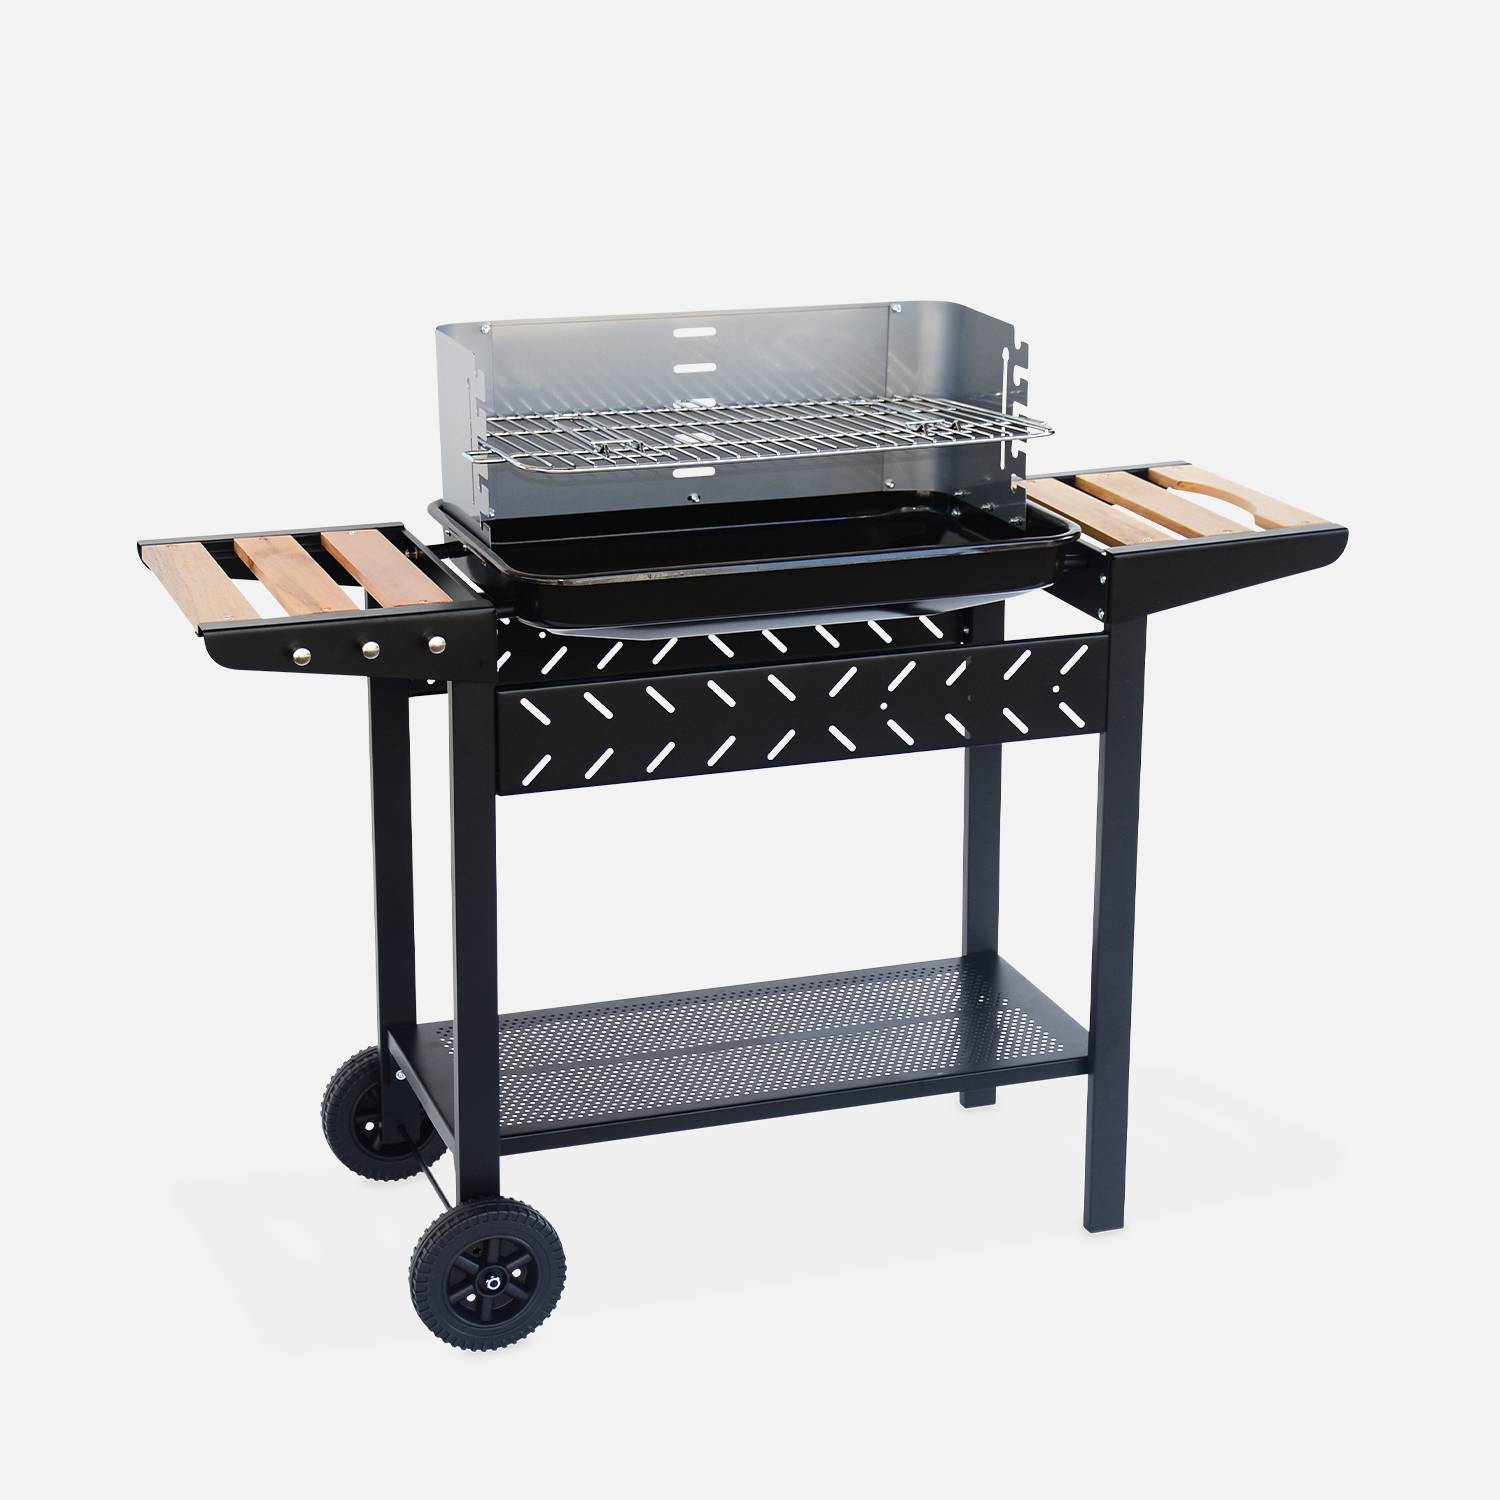 Charcoal barbecue,  adjustable grill height, enamelled bowl, wooden shelves, shelf and hooks, black and grey Photo2